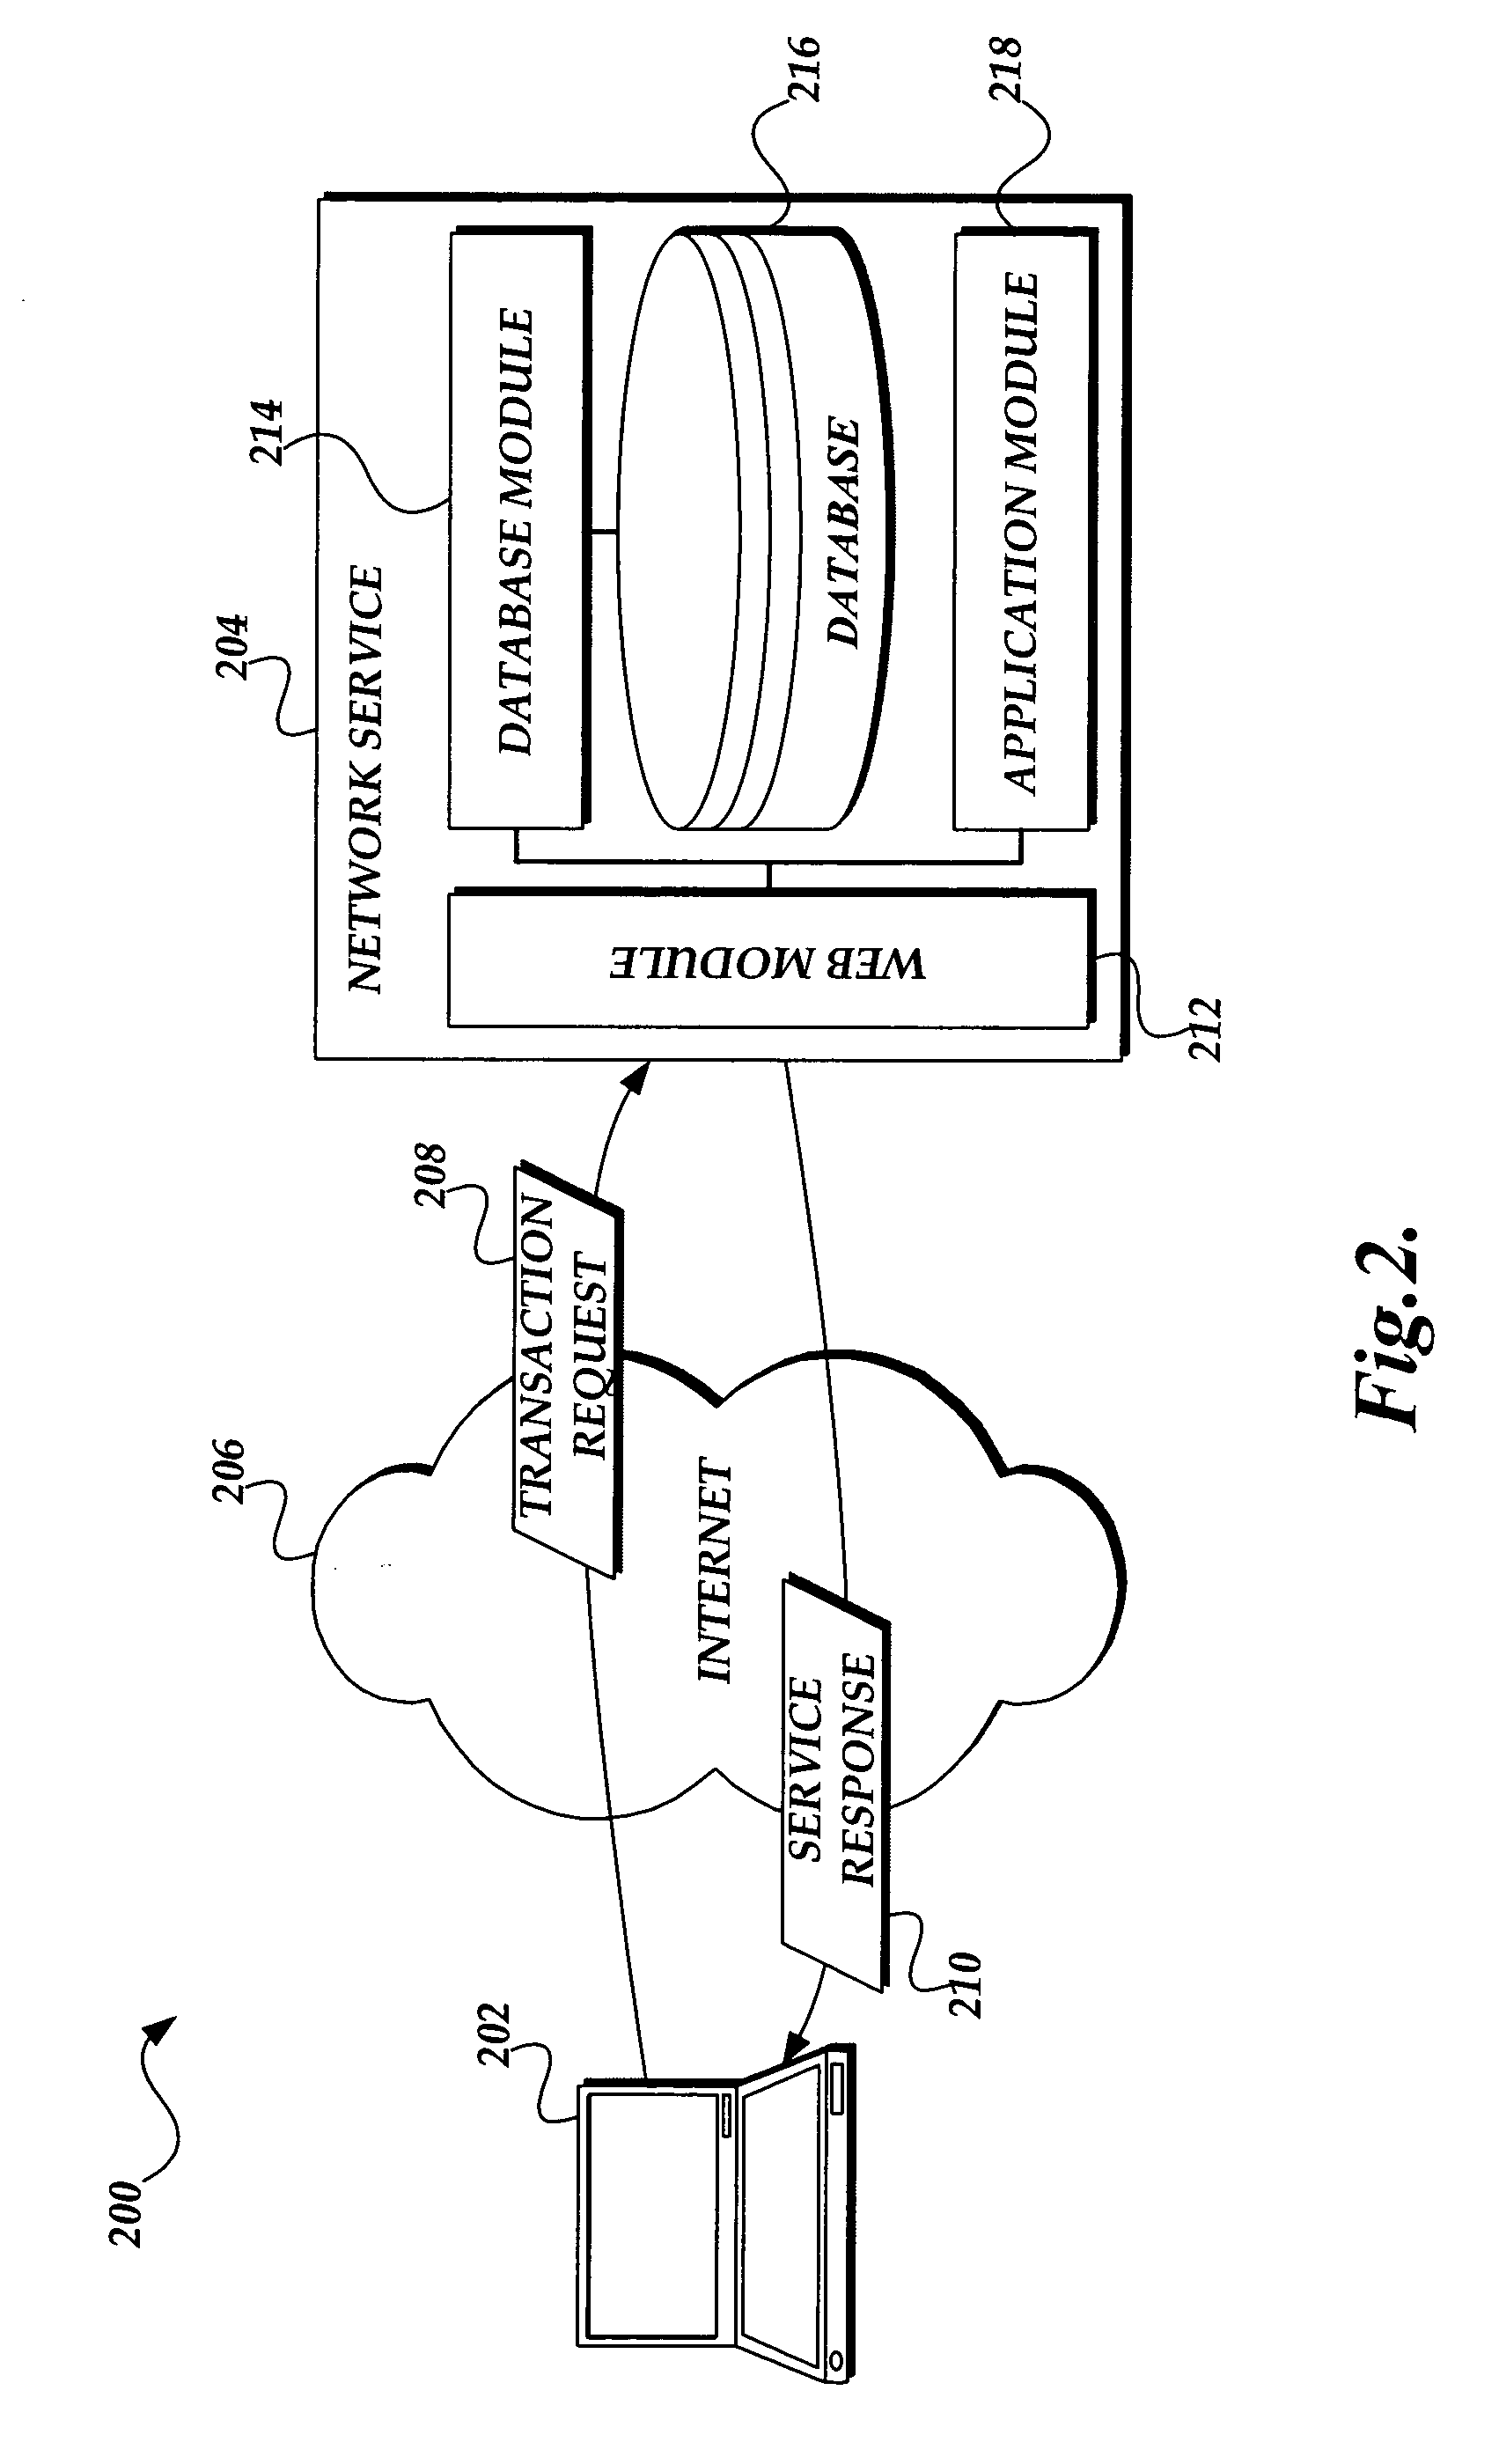 Generating static performance modeling factors in a deployed system